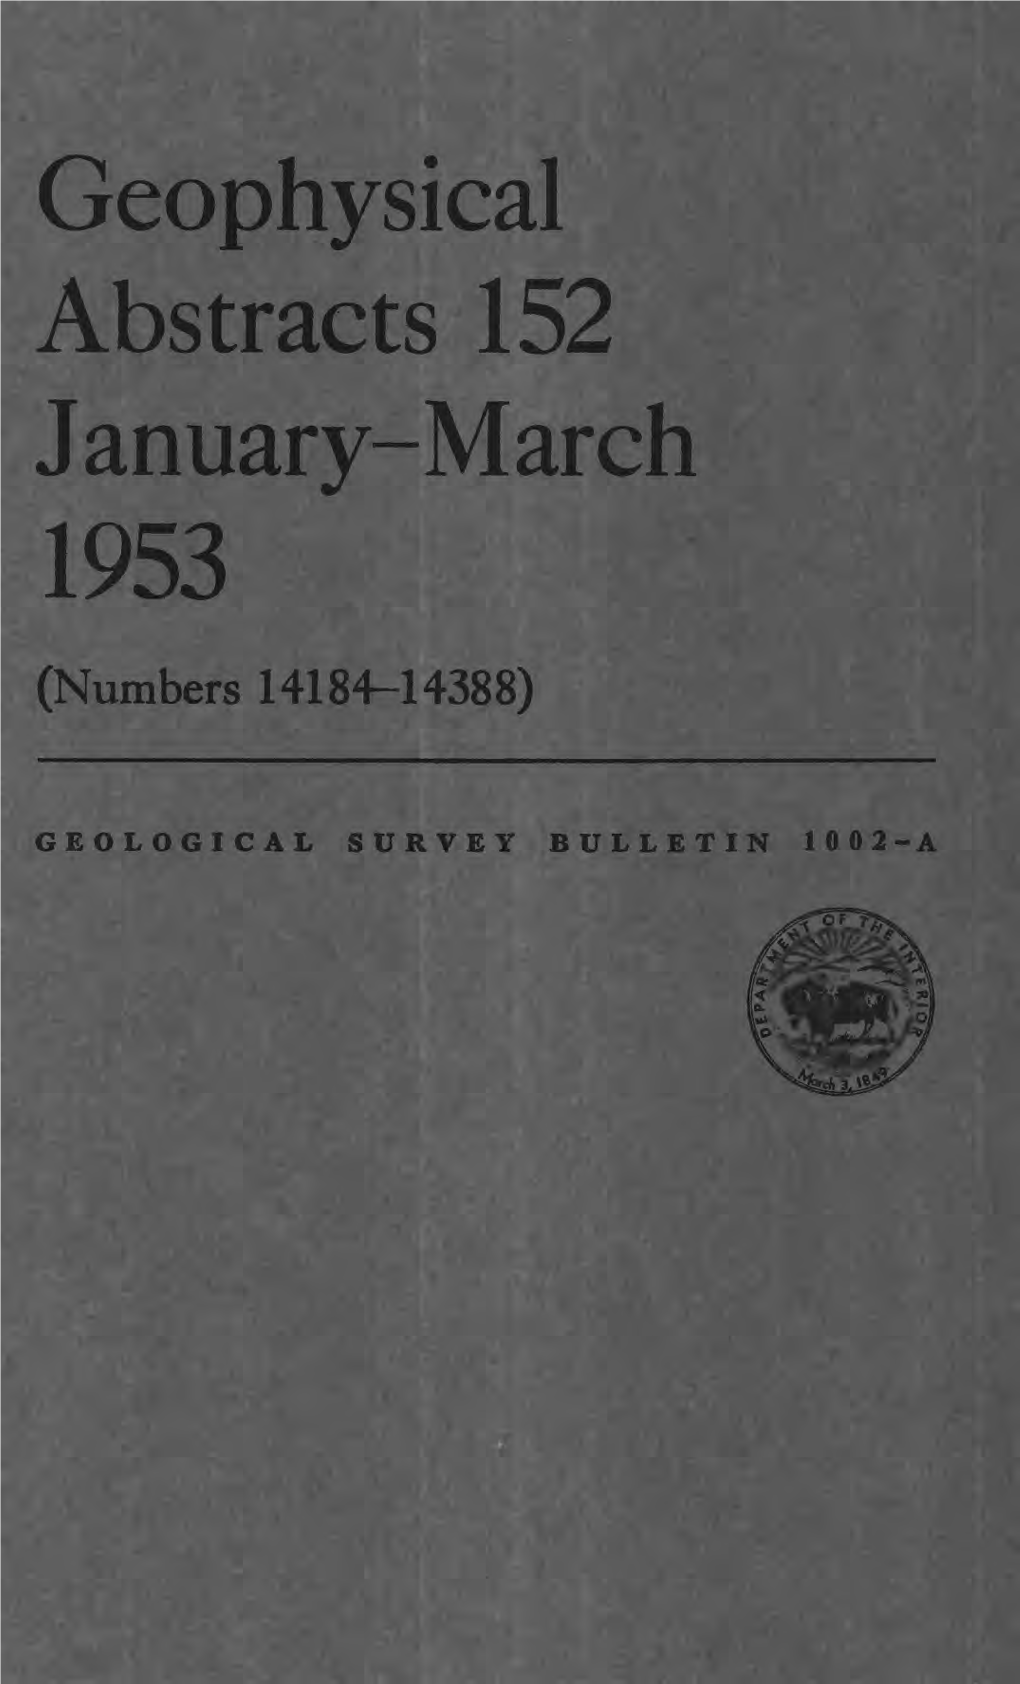 Geophysical Abstracts 152 January-March 1953 (Numbers 14184-14388)